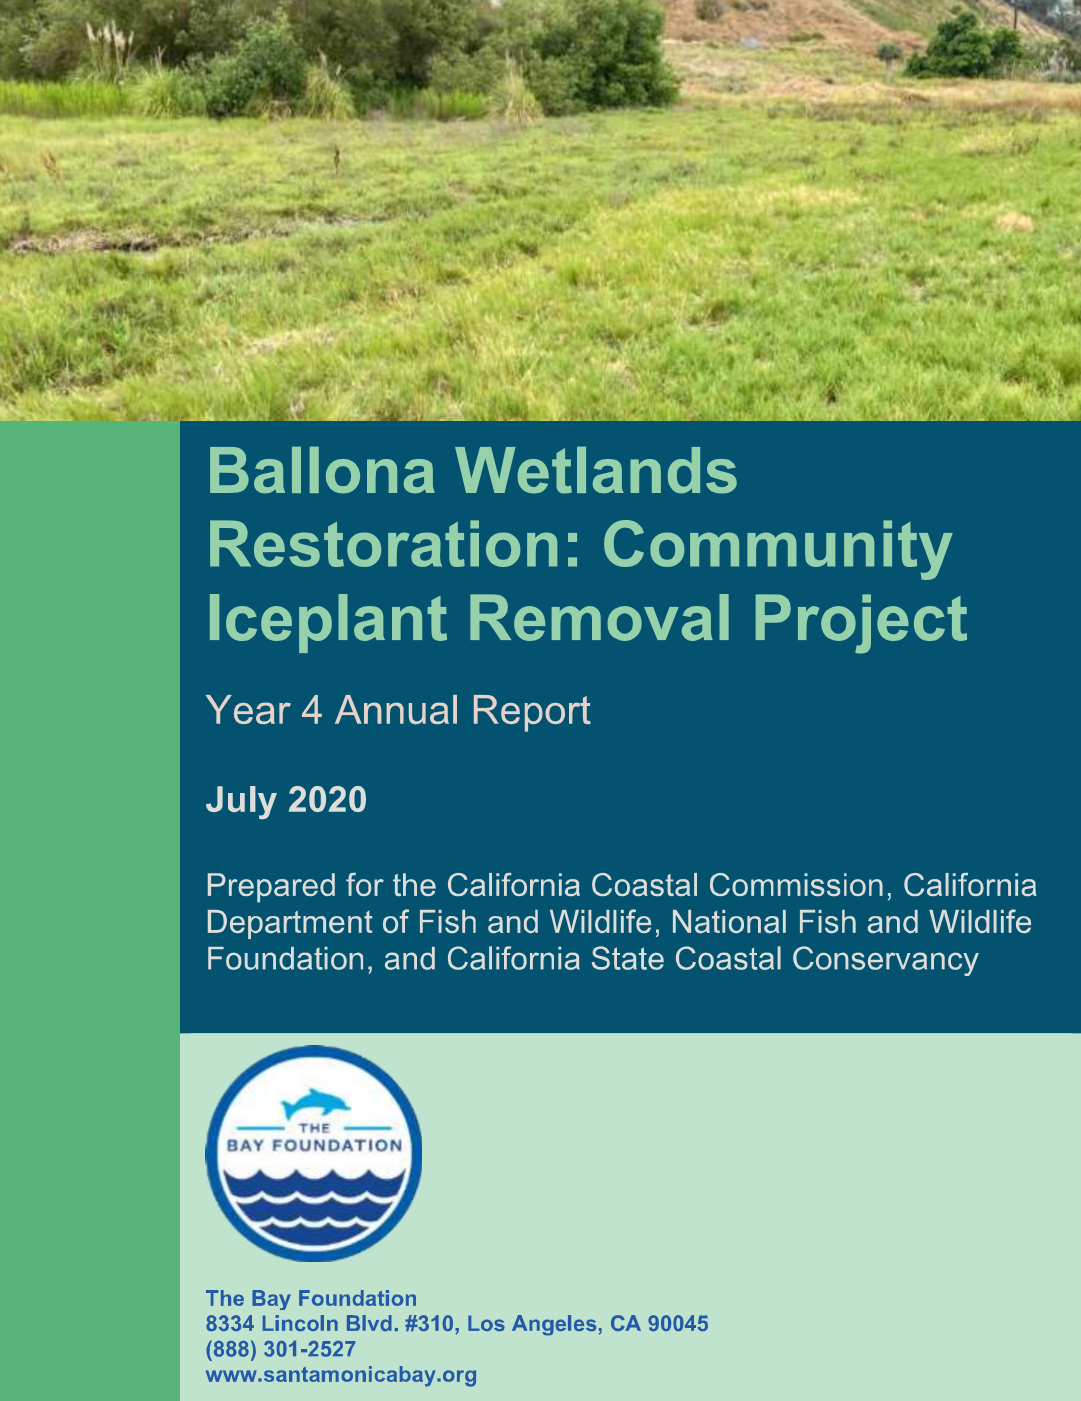 Ballona Wetlands Restoration Community Iceplant Removal Project Year 4